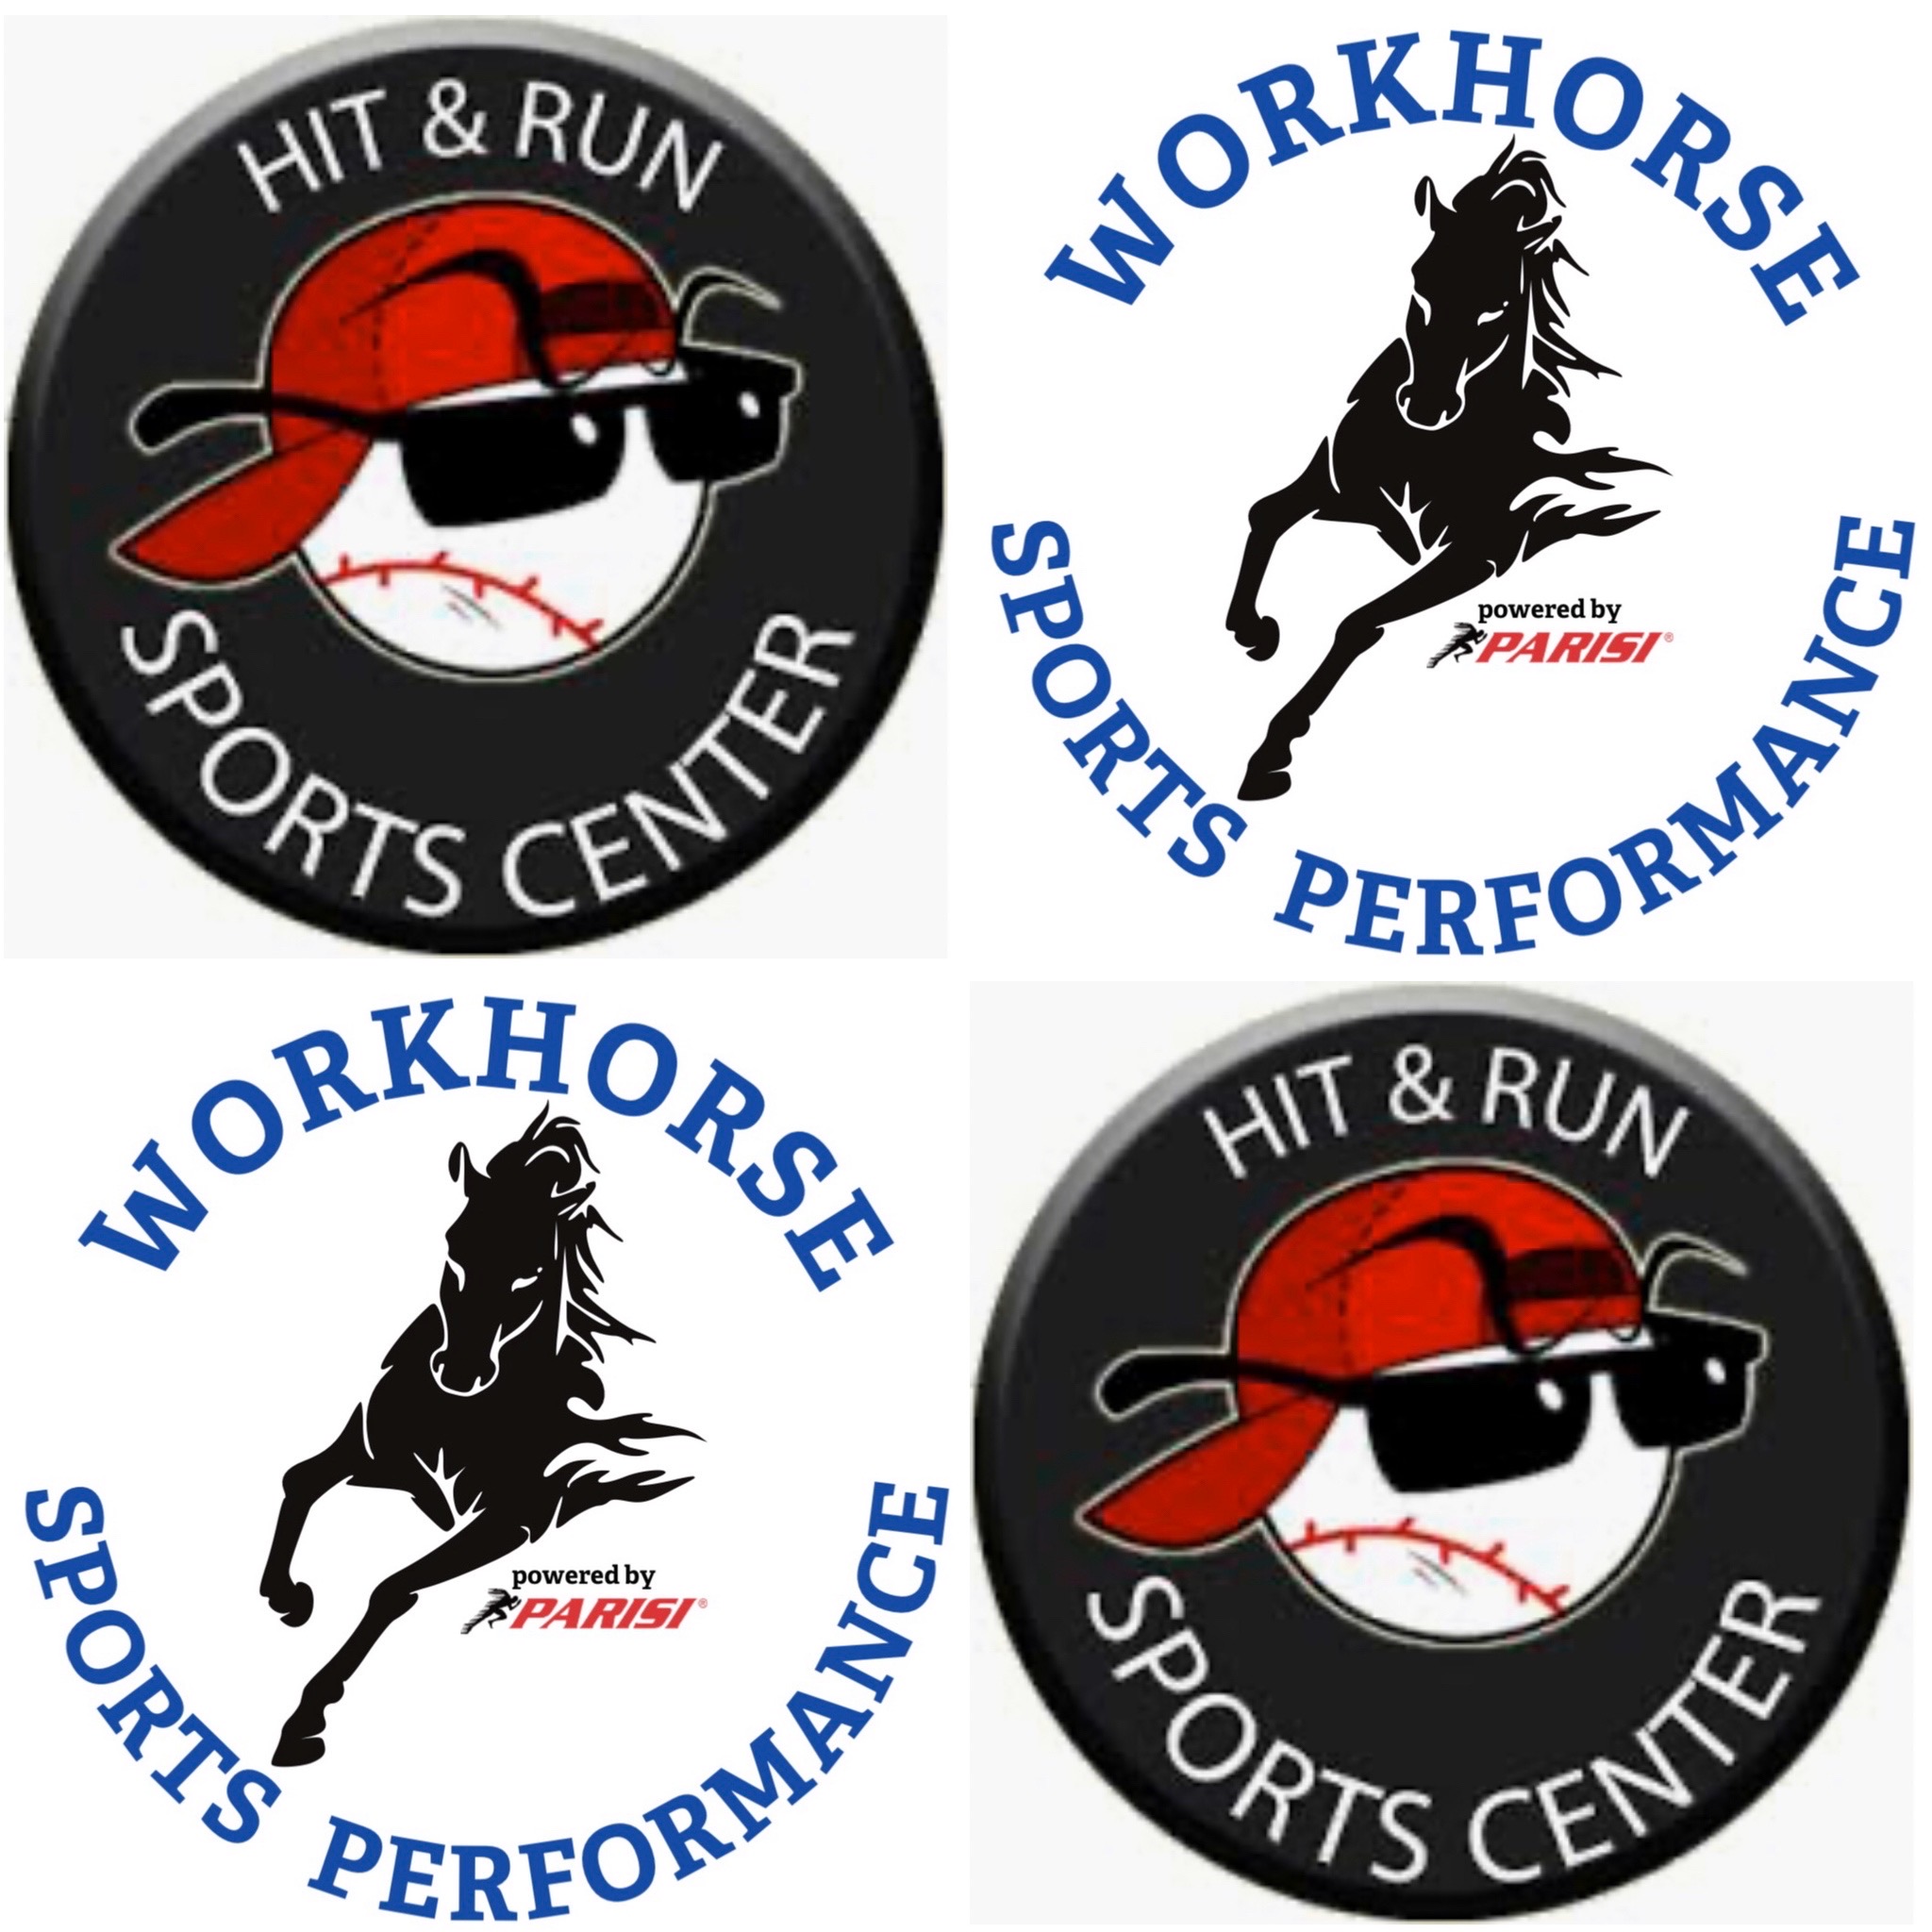 Outdoor Training Available At Hit & Run Sports Center